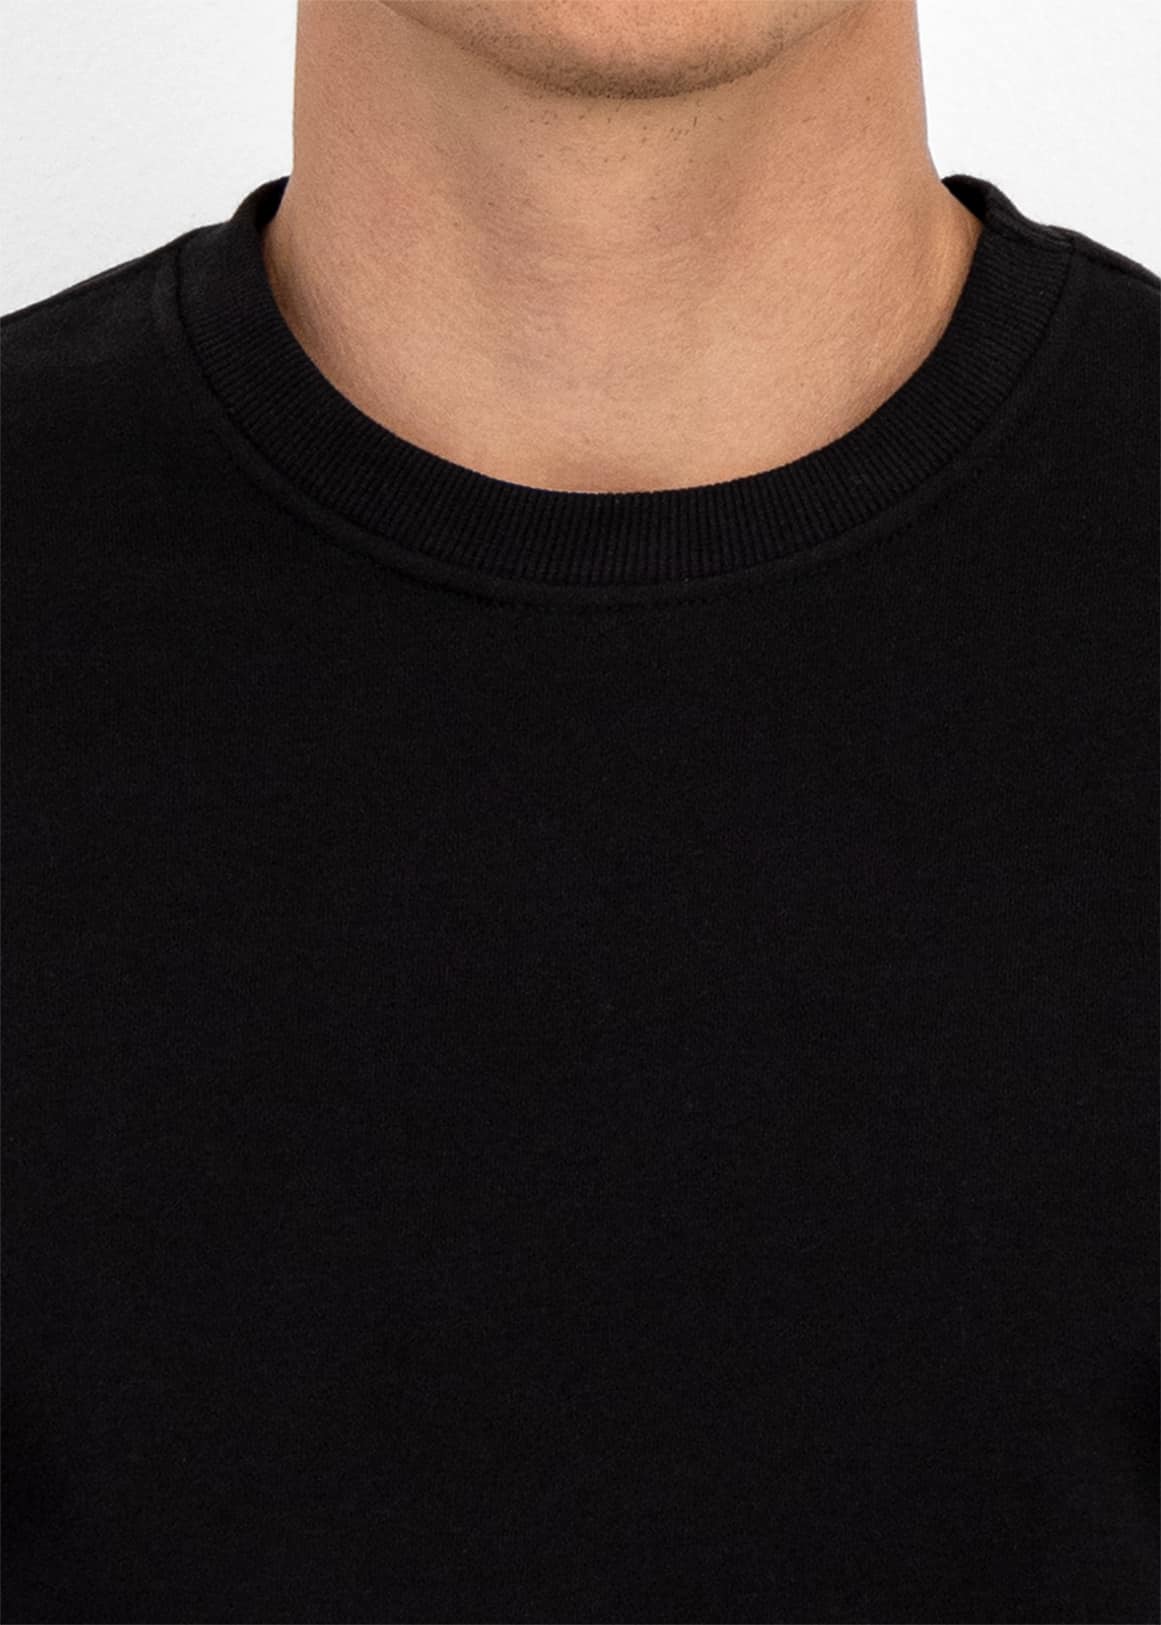 AW23 PLAIN CREW NECK - Woolworths Mauritius Online